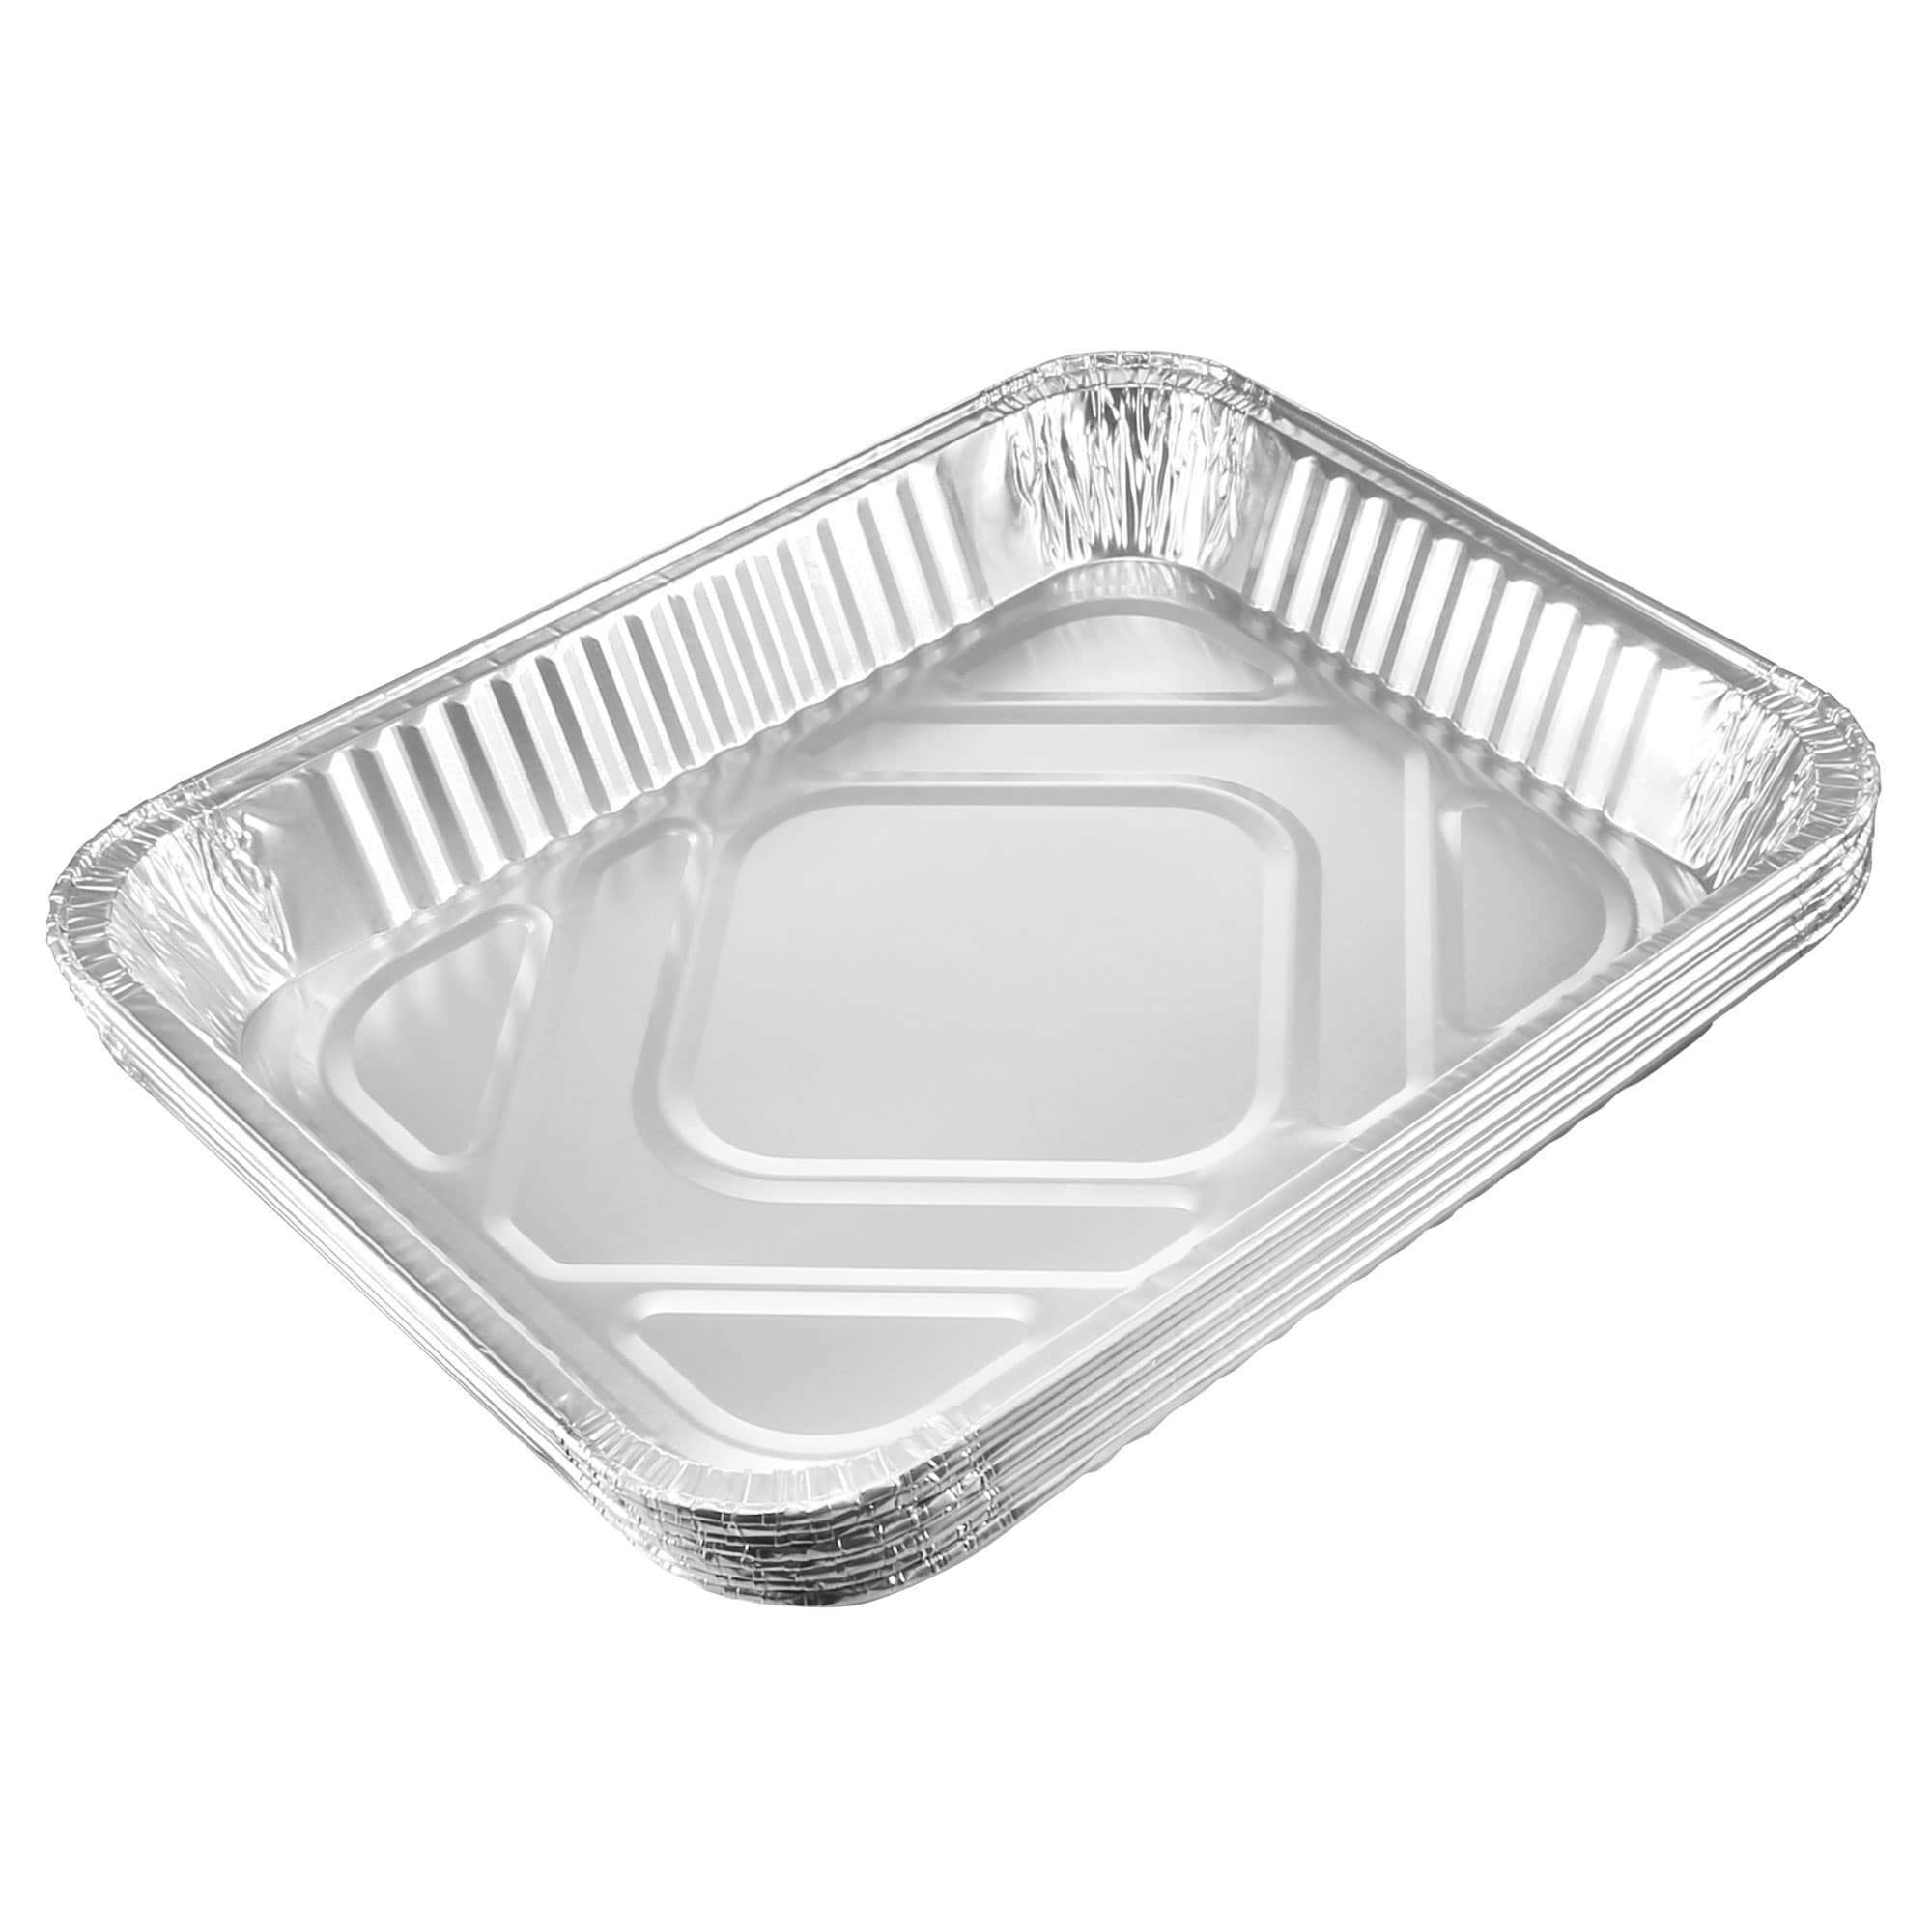 Displastible Disposable Aluminum Pans with Lids Cooking & Baking Food Container, 10-Pack, Silver